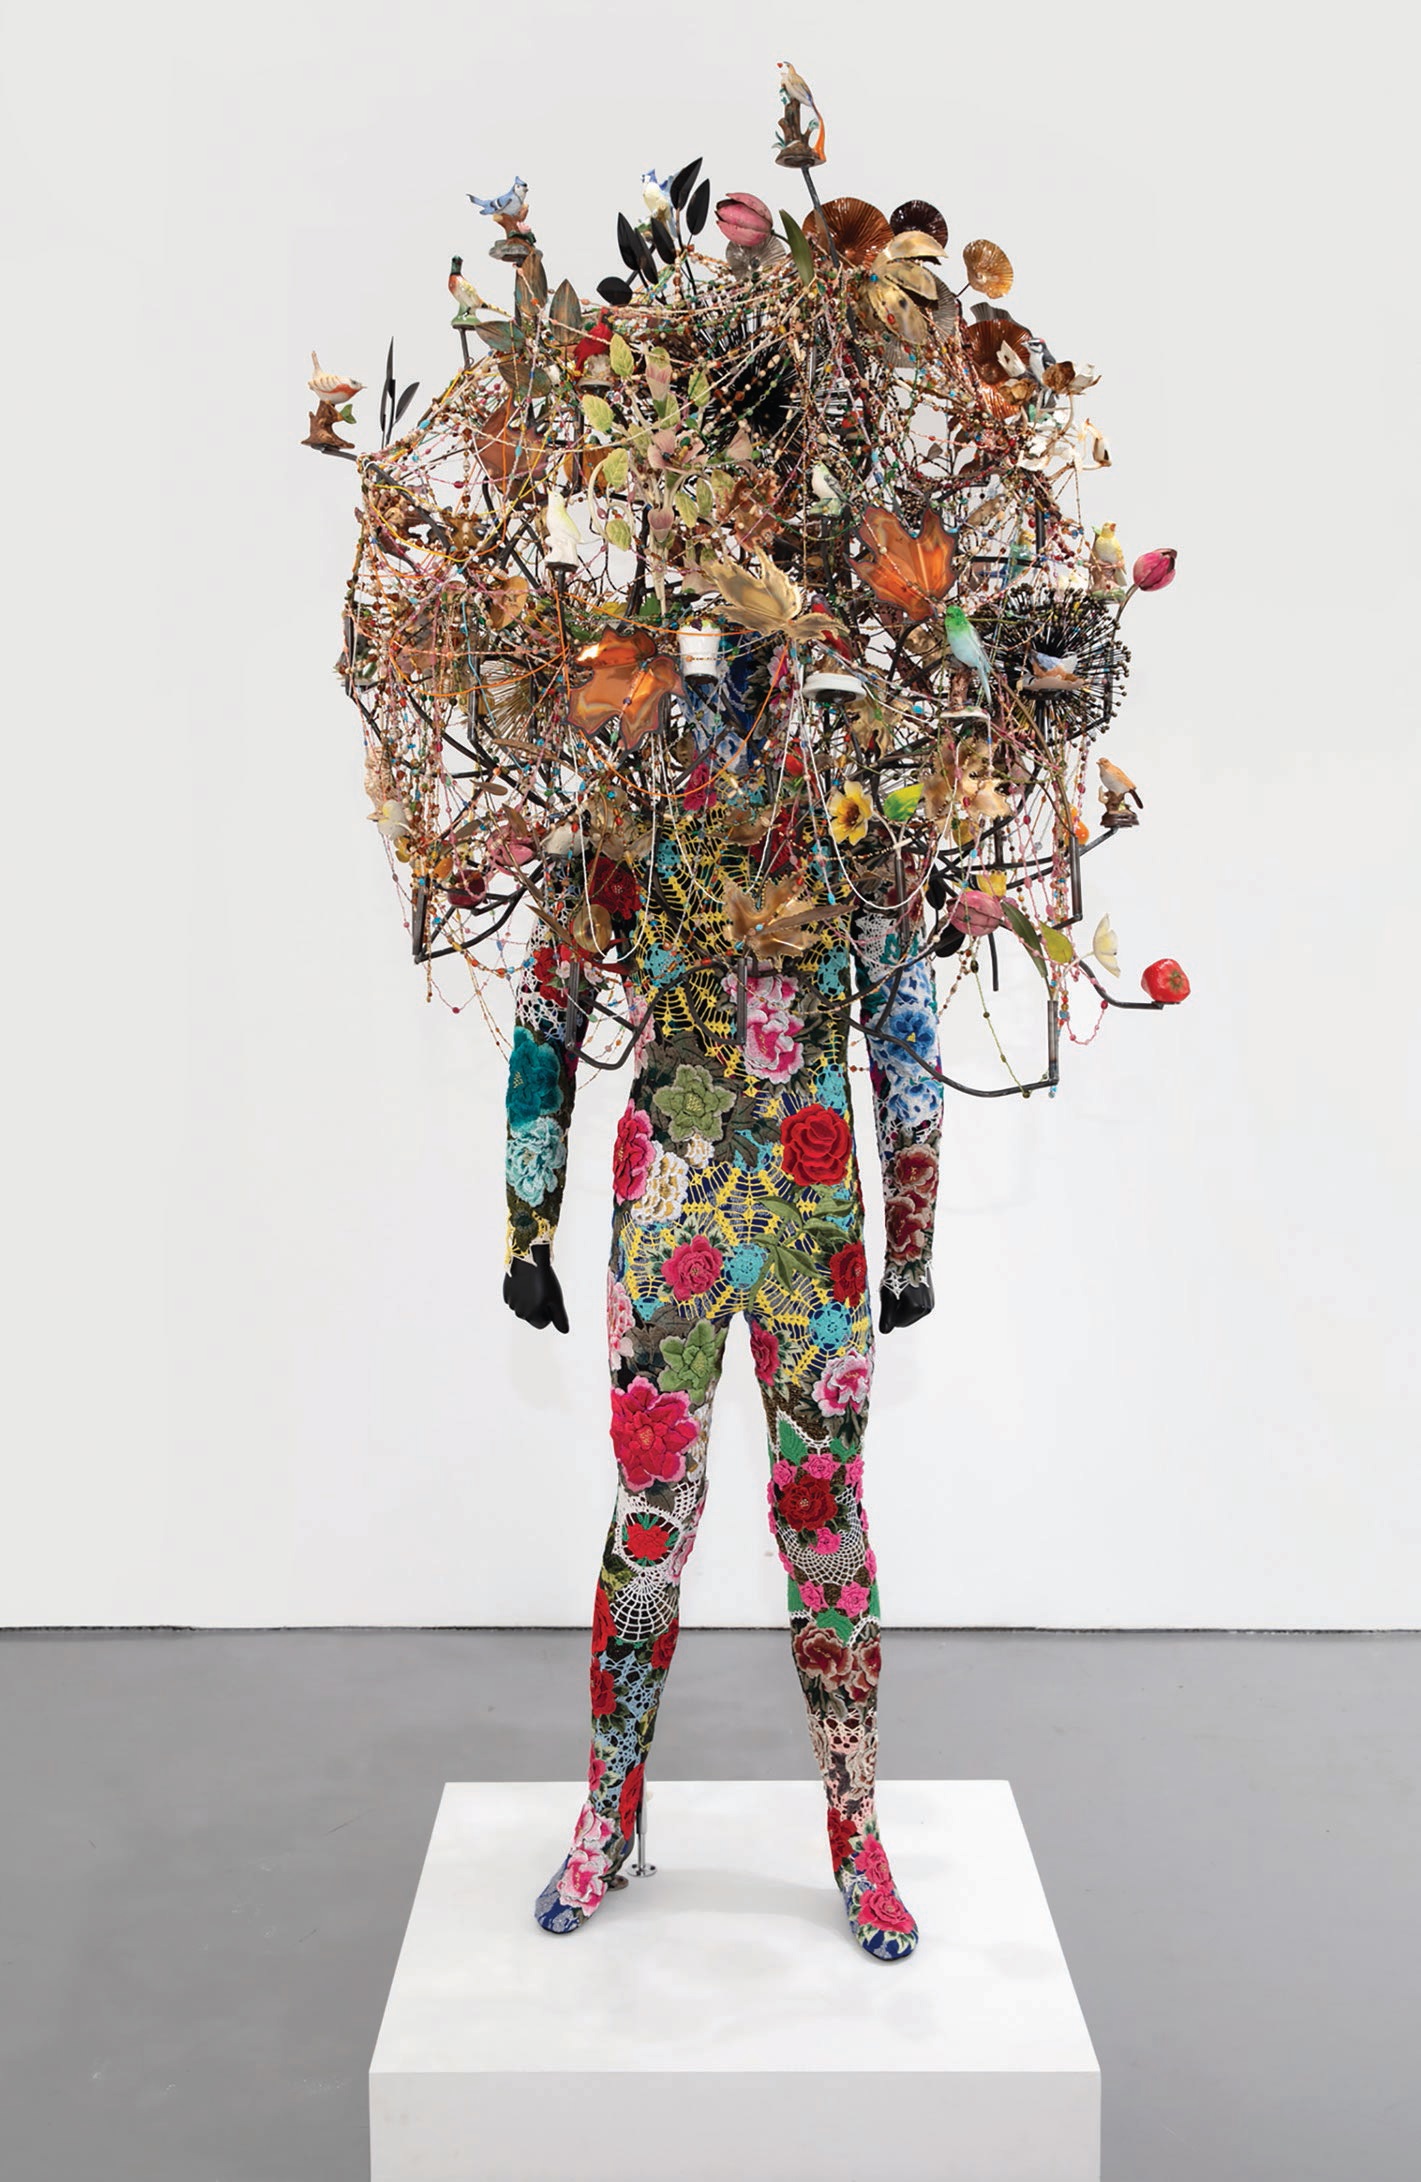 “Soundsuit” (2021, mixed media including vintage ceramic birds, wire, beads, fabric, metal and mannequin), 98 1/₂ inches by 48 inches by 48 inches